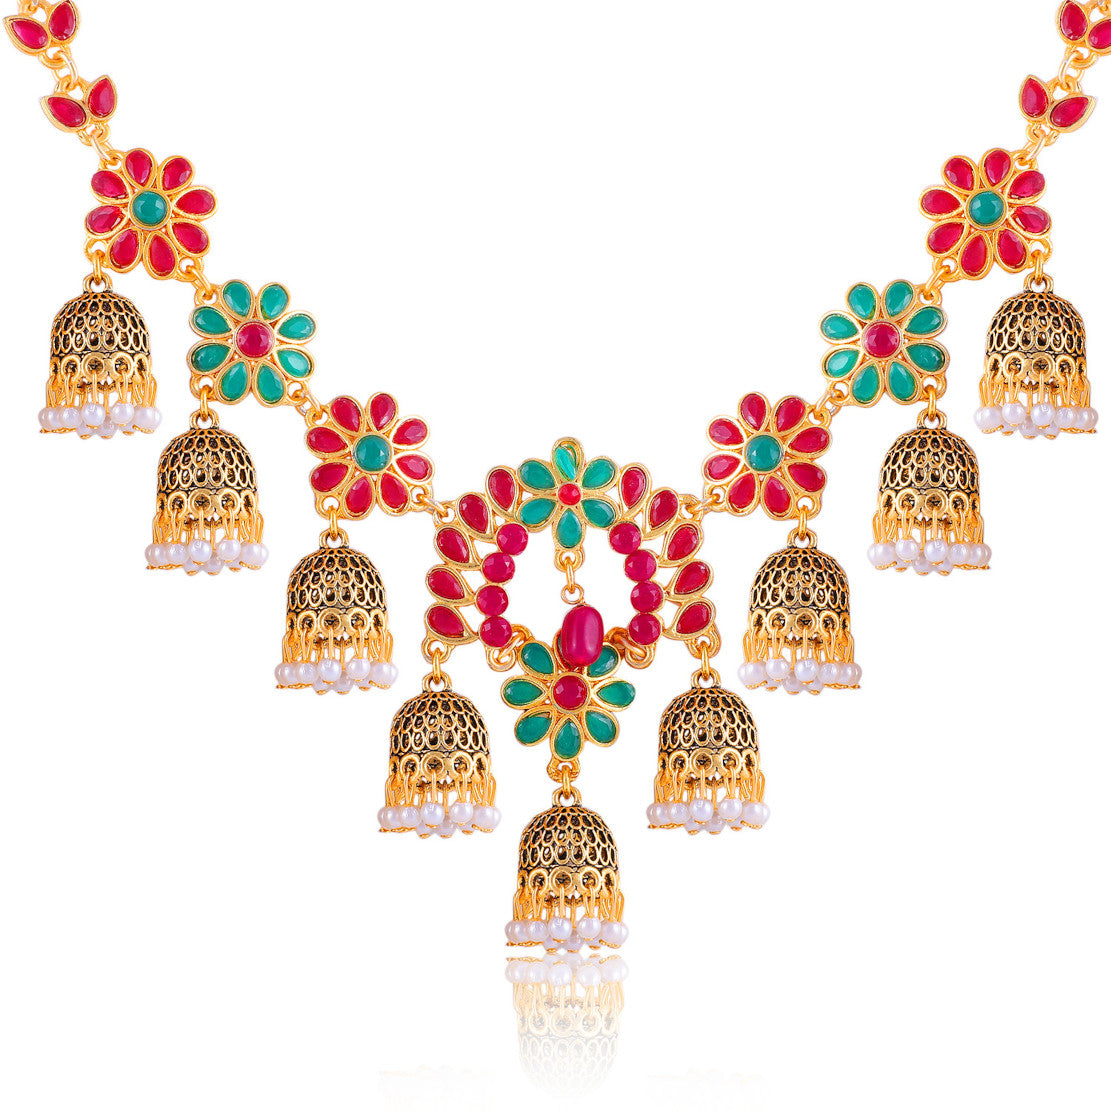 Traditional Designed by Handcrafted Multicolor Necklace with Earrings for Women | Buy This Necklace Online from Mekkna